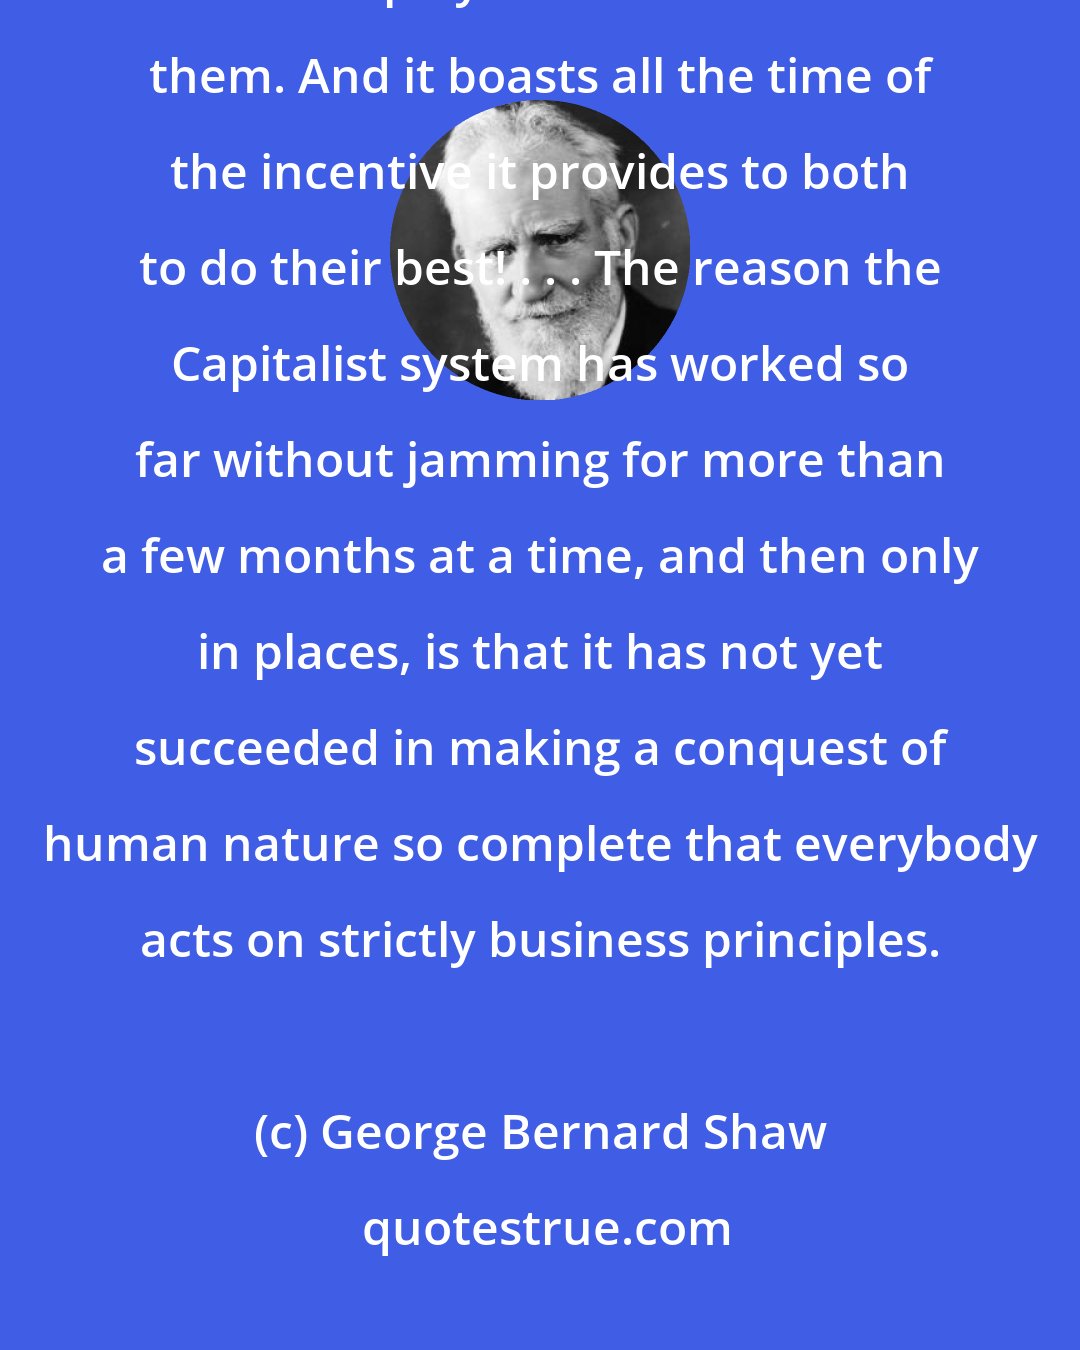 George Bernard Shaw: Capitalism drives the employers to do their worst to the employed, and the employed to do the least for them. And it boasts all the time of the incentive it provides to both to do their best! . . . The reason the Capitalist system has worked so far without jamming for more than a few months at a time, and then only in places, is that it has not yet succeeded in making a conquest of human nature so complete that everybody acts on strictly business principles.